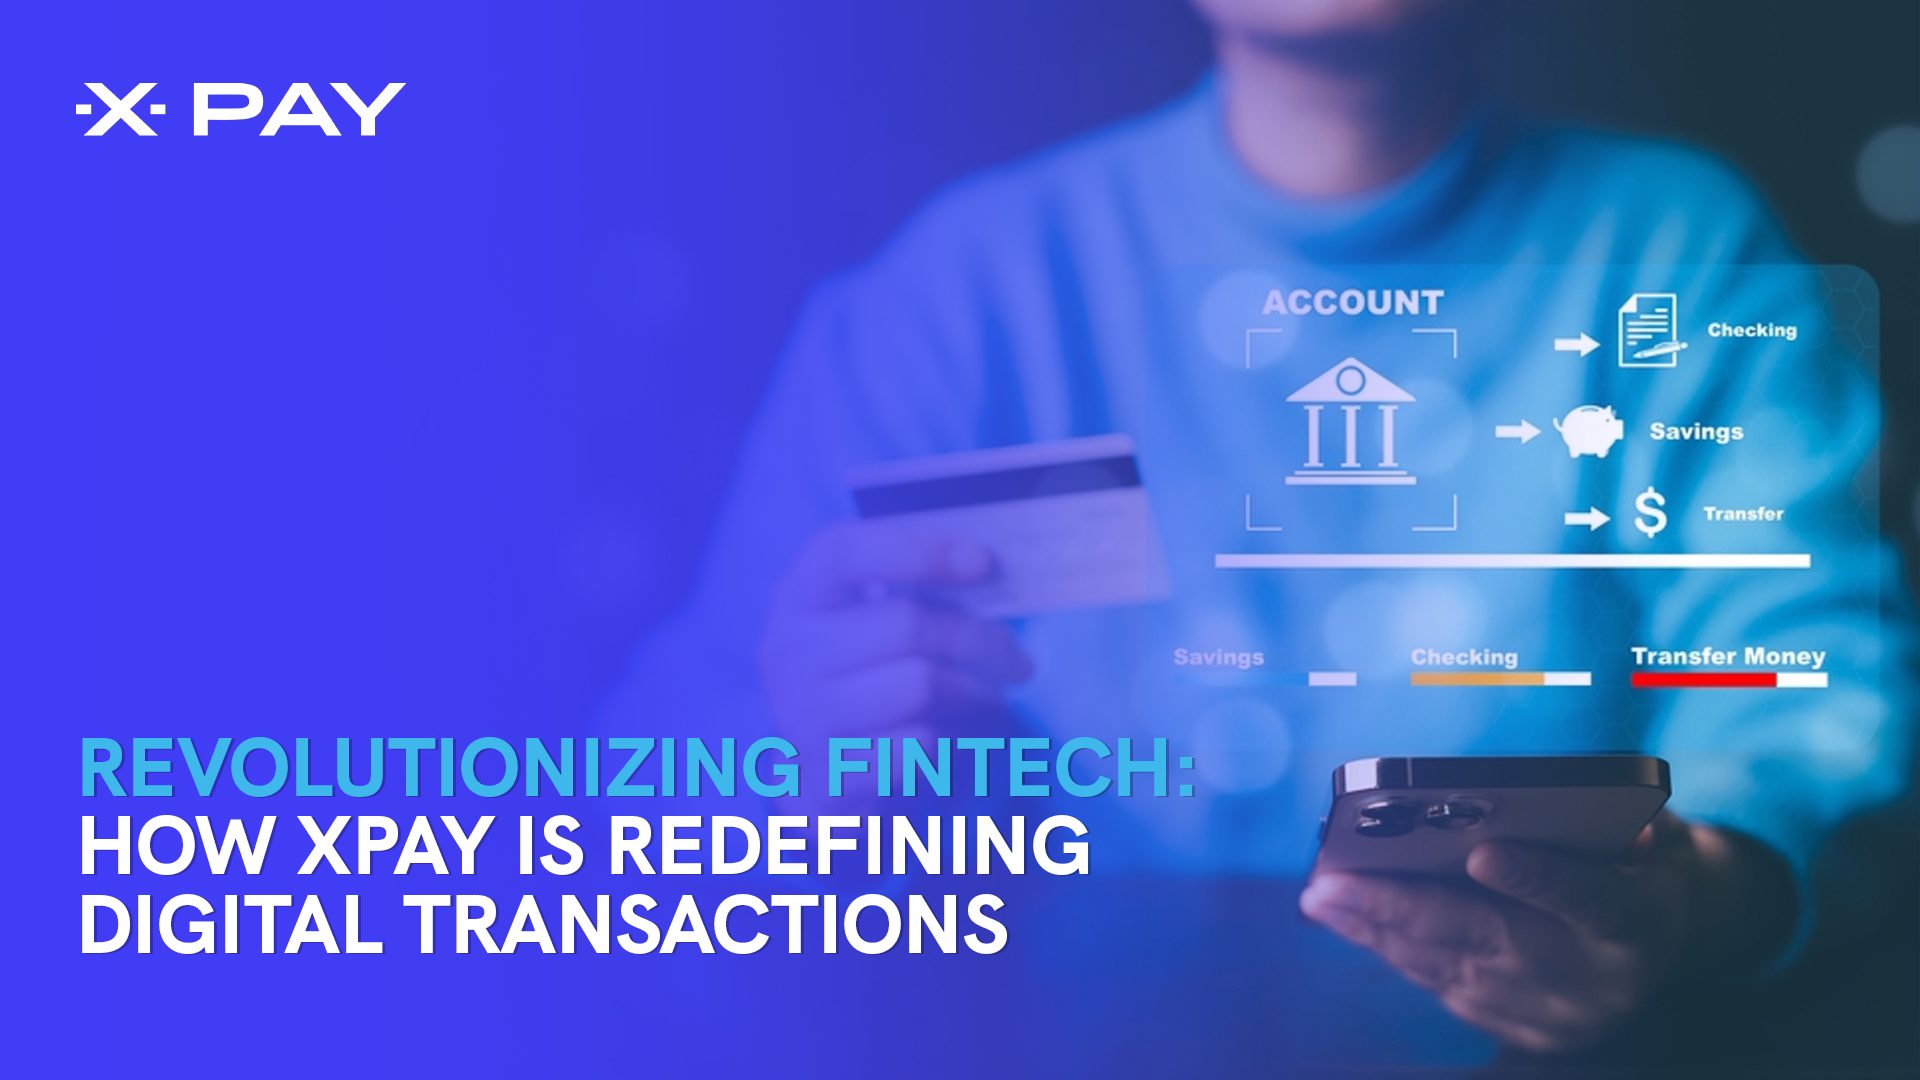 Revolutionizing FinTech: How XPay is Redefining Digital Transactions